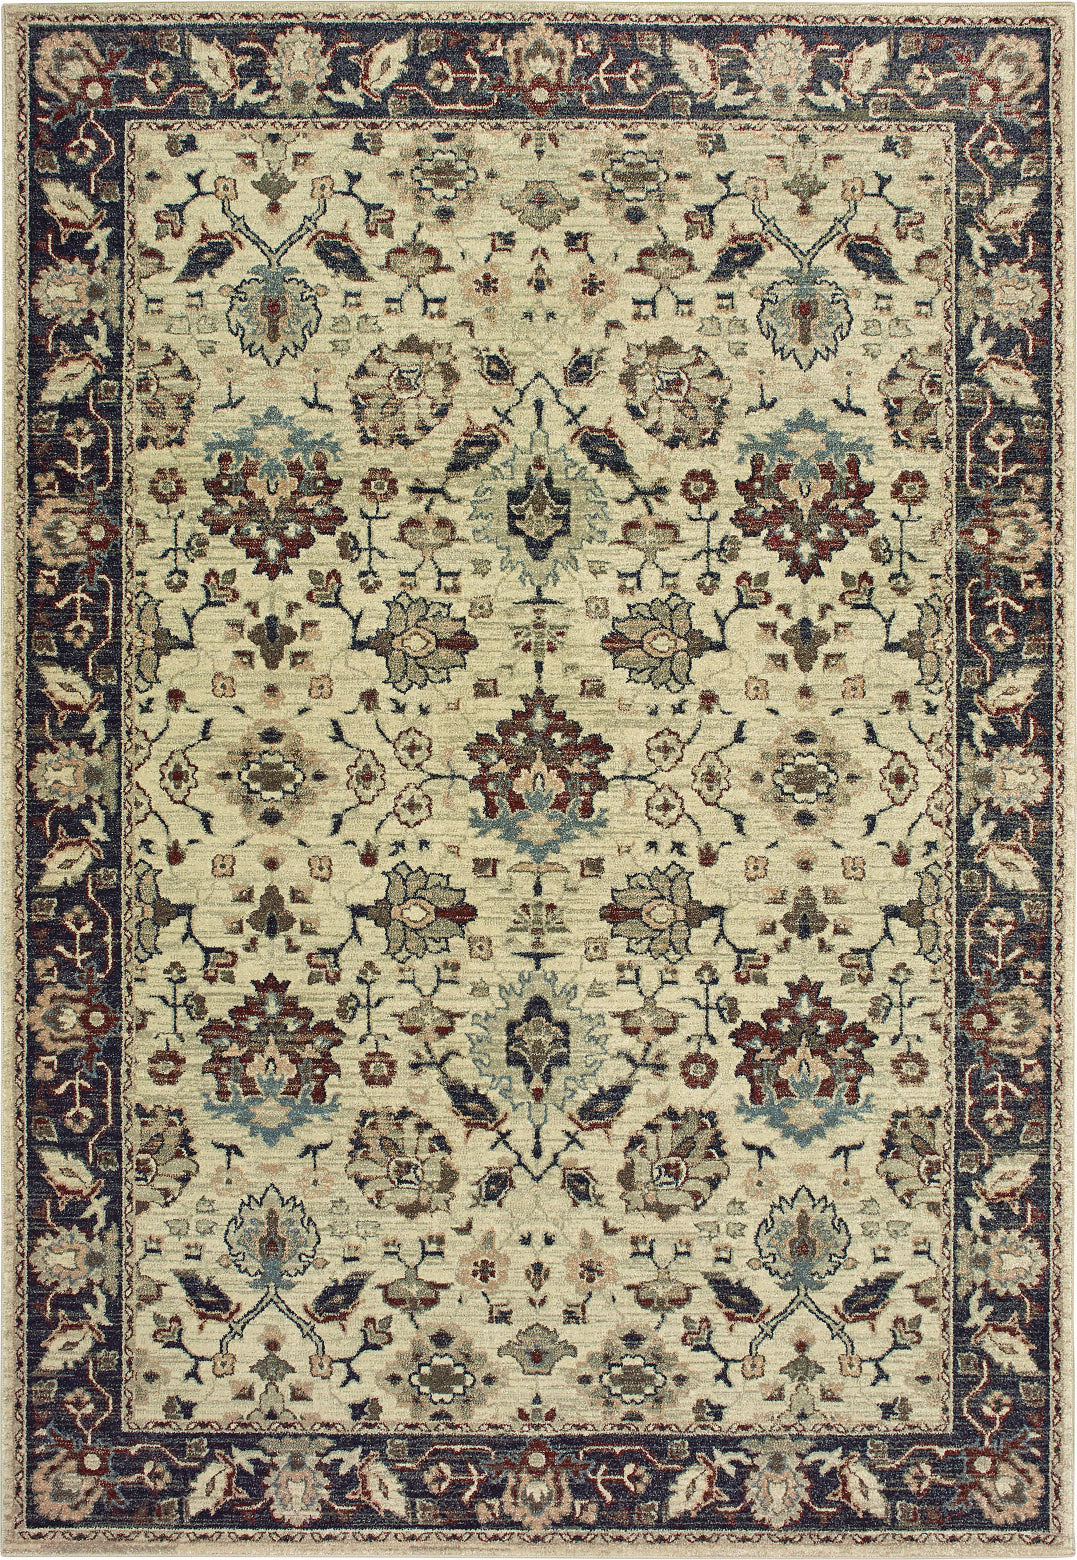 Oriental Weavers Raleigh 8026E Ivory/Navy Area Rug main image featured